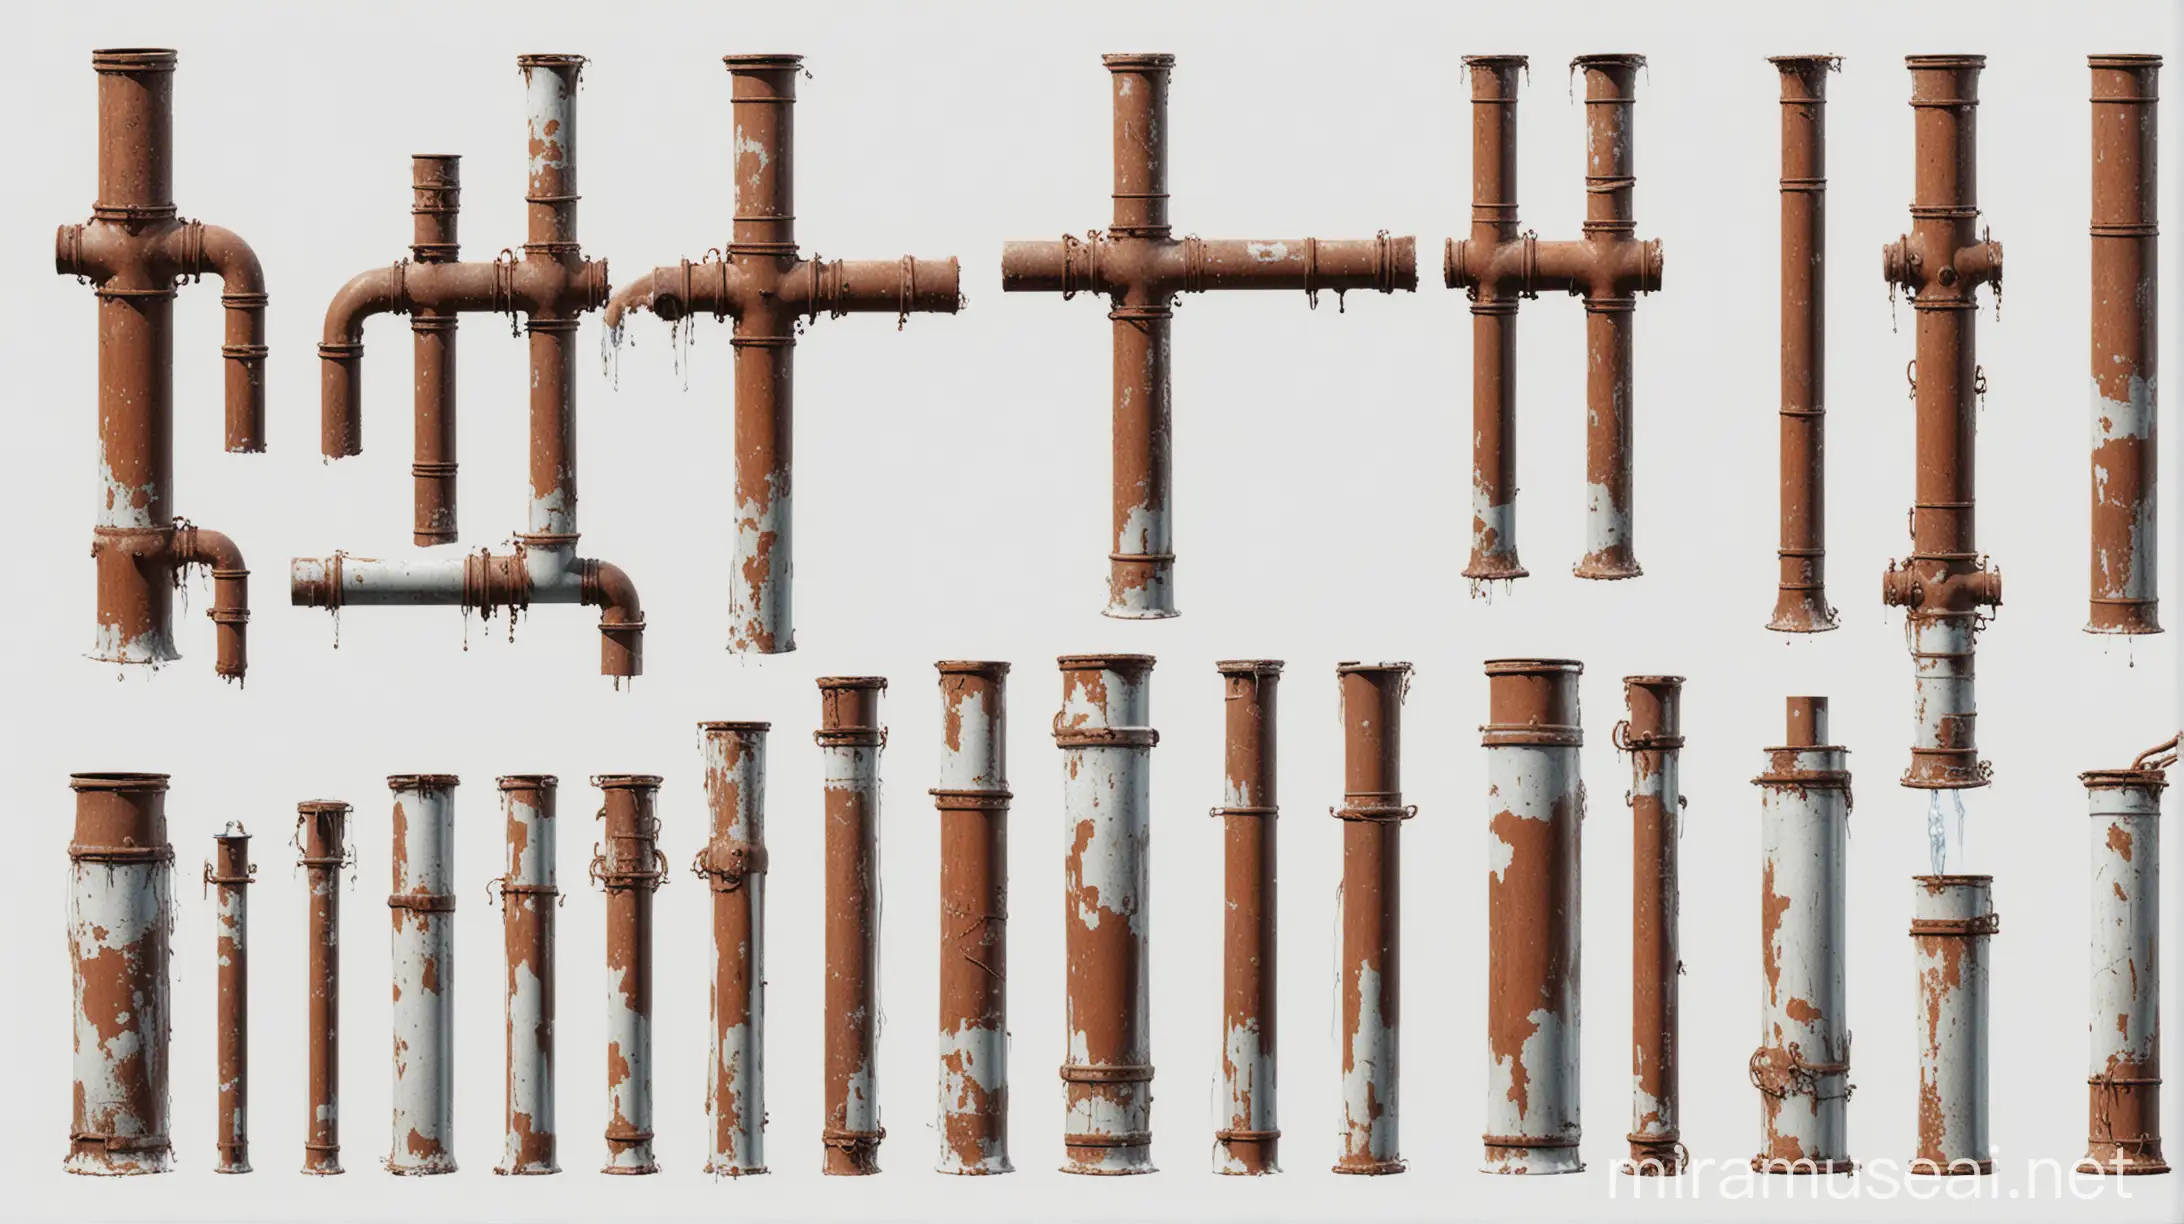 Rusted Iron and Water Pipes Digital Drawing on White Background